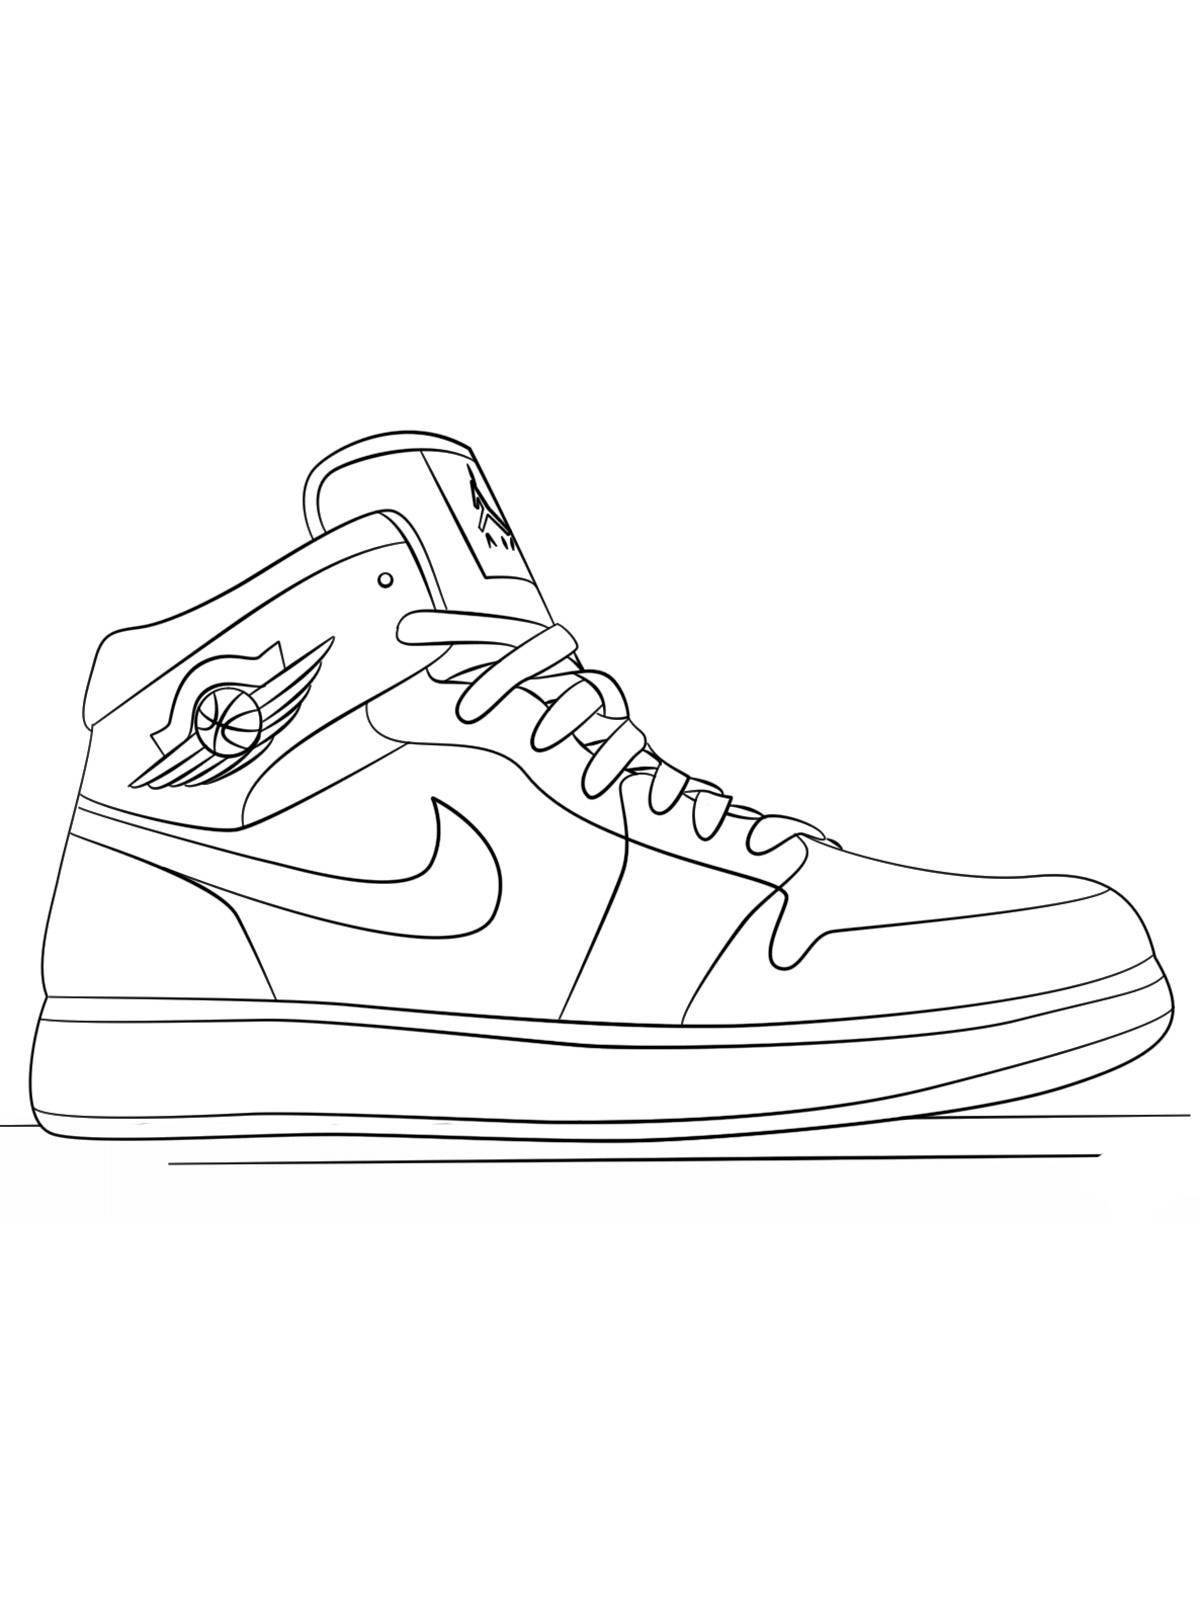 Amazing coloring page of nike sneakers